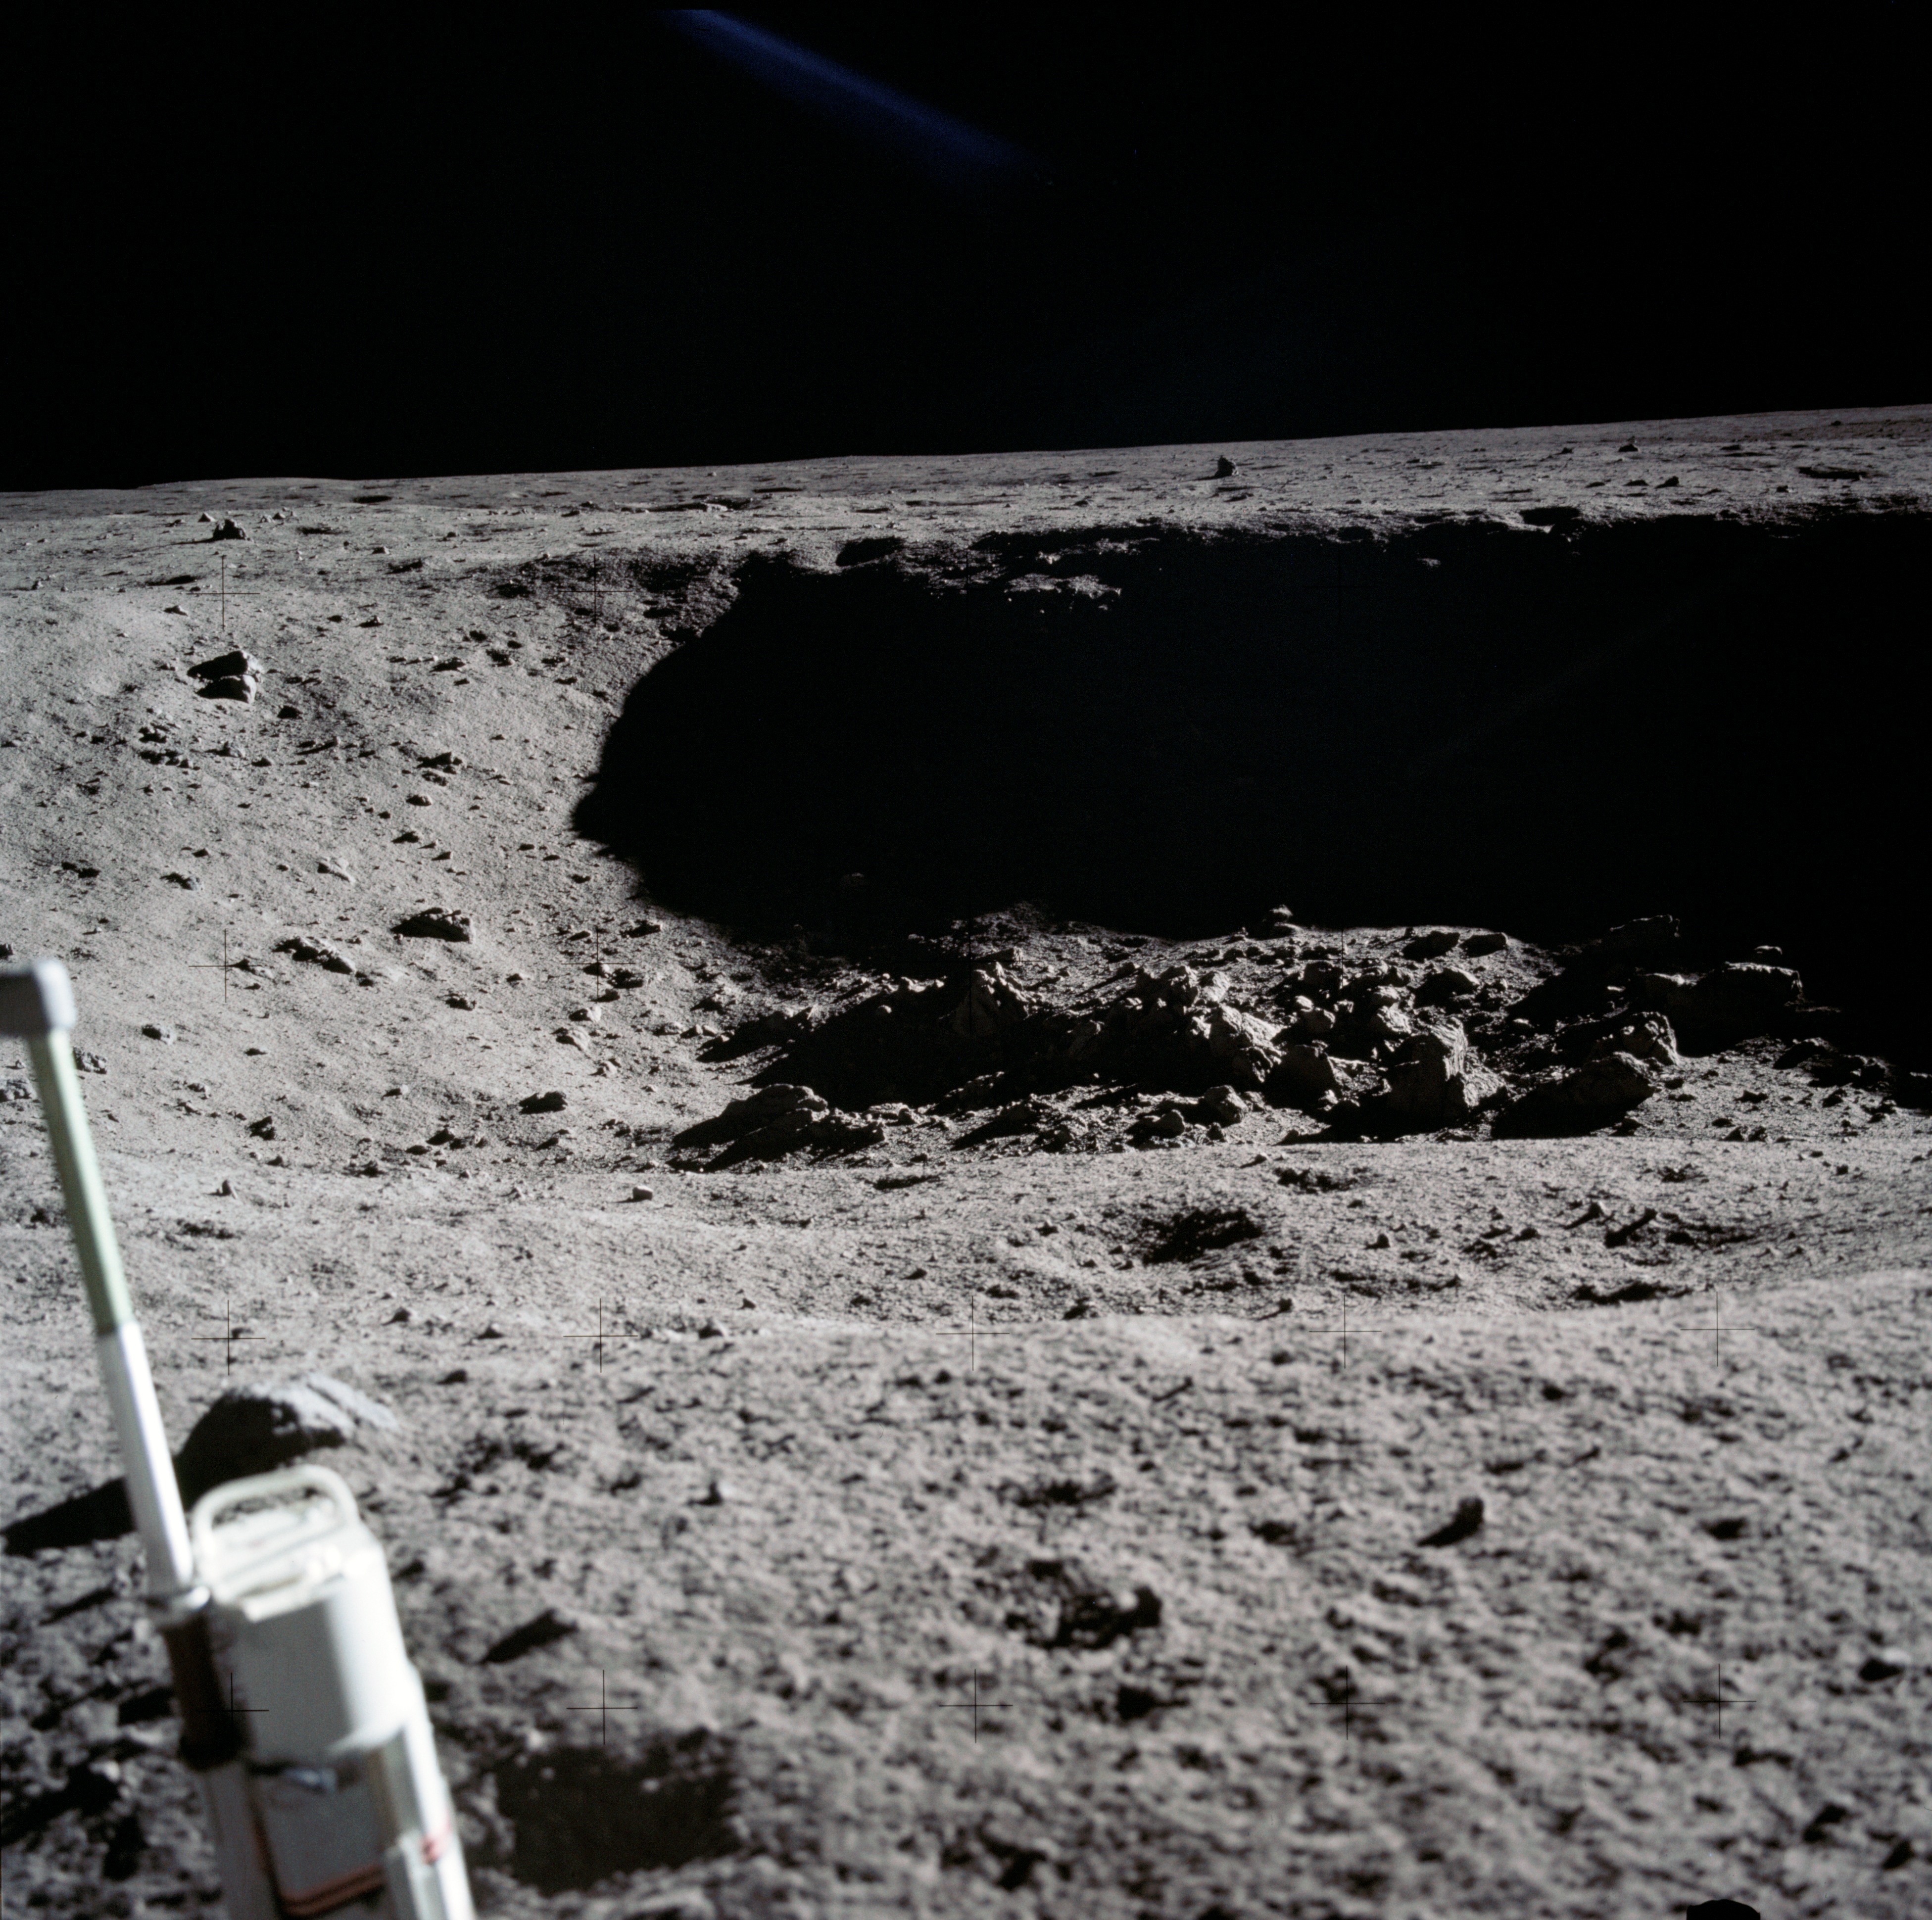 A view to the Little West crater on the Moon surface, pictured shortly after the historic Apollo 11 landing on July 20, 1969.